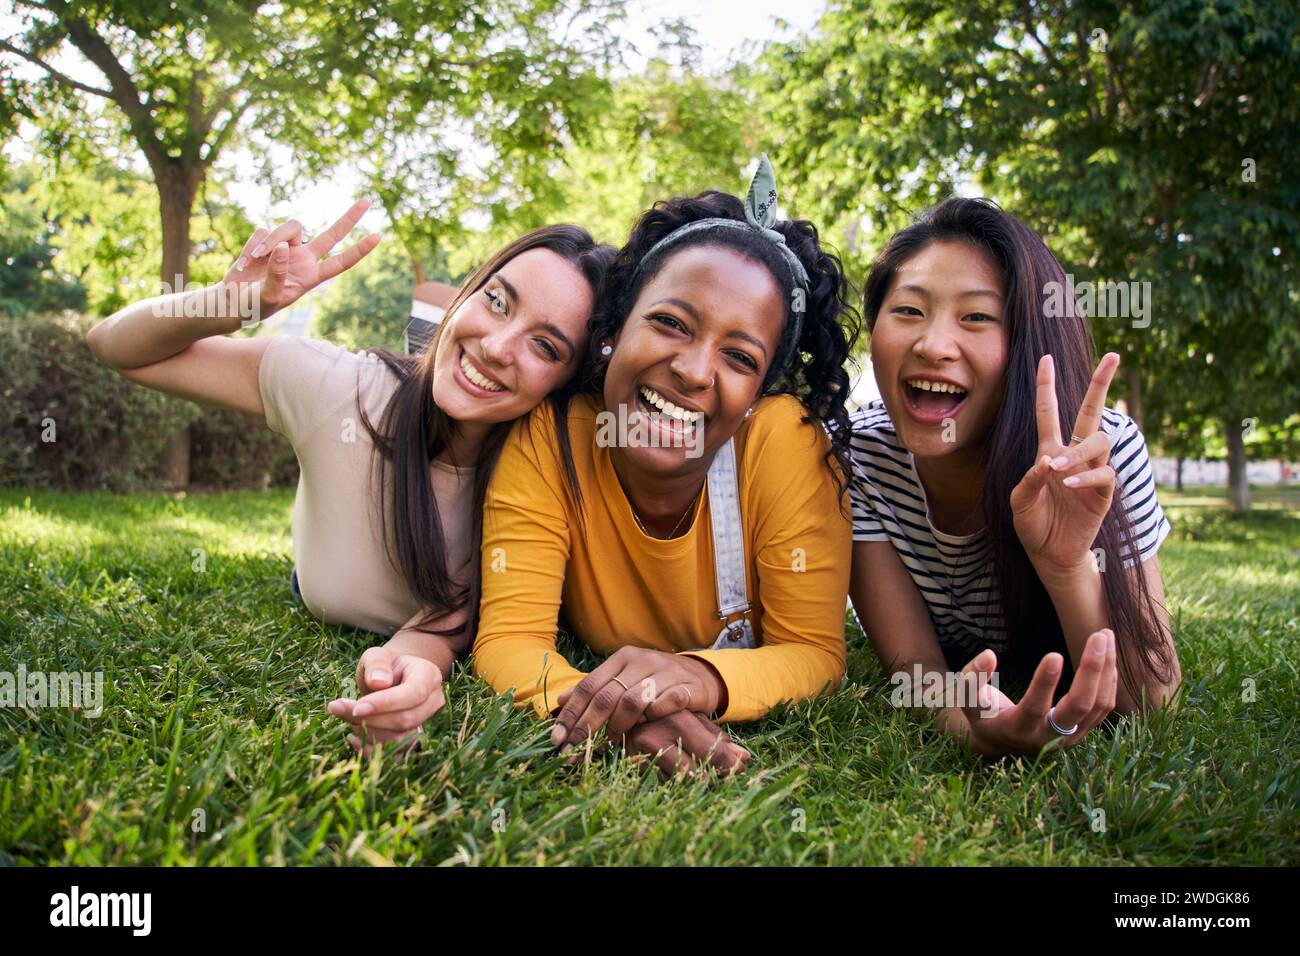 Multi-ethnic group portrait smiling young women lying on grass in park. Generation z sunny outdoors. Stock Photo